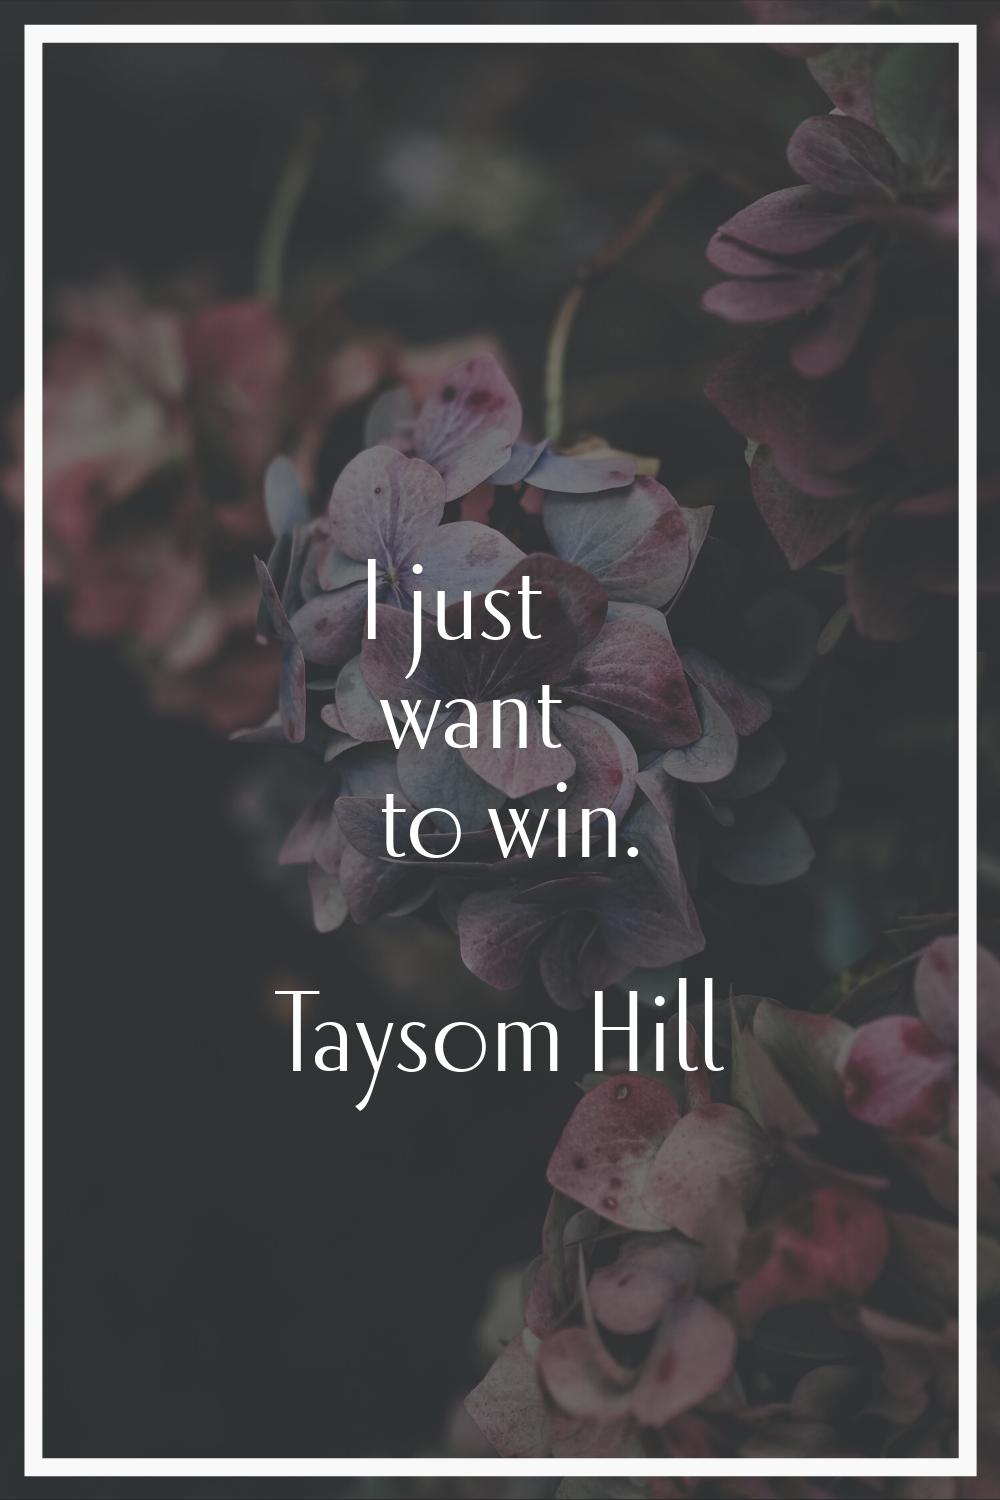 I just want to win.